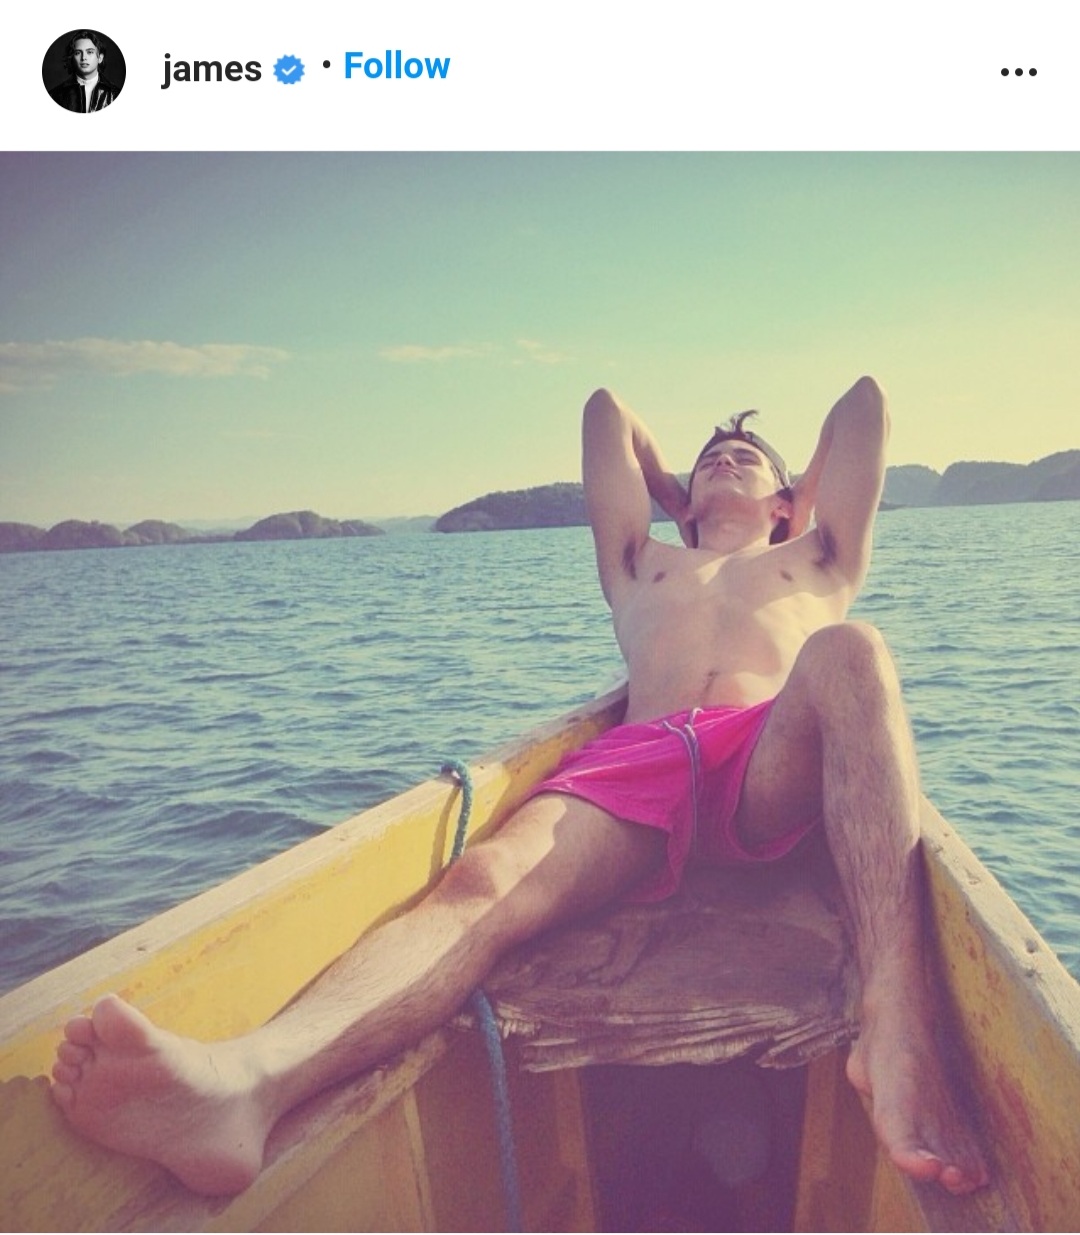 james on a boat